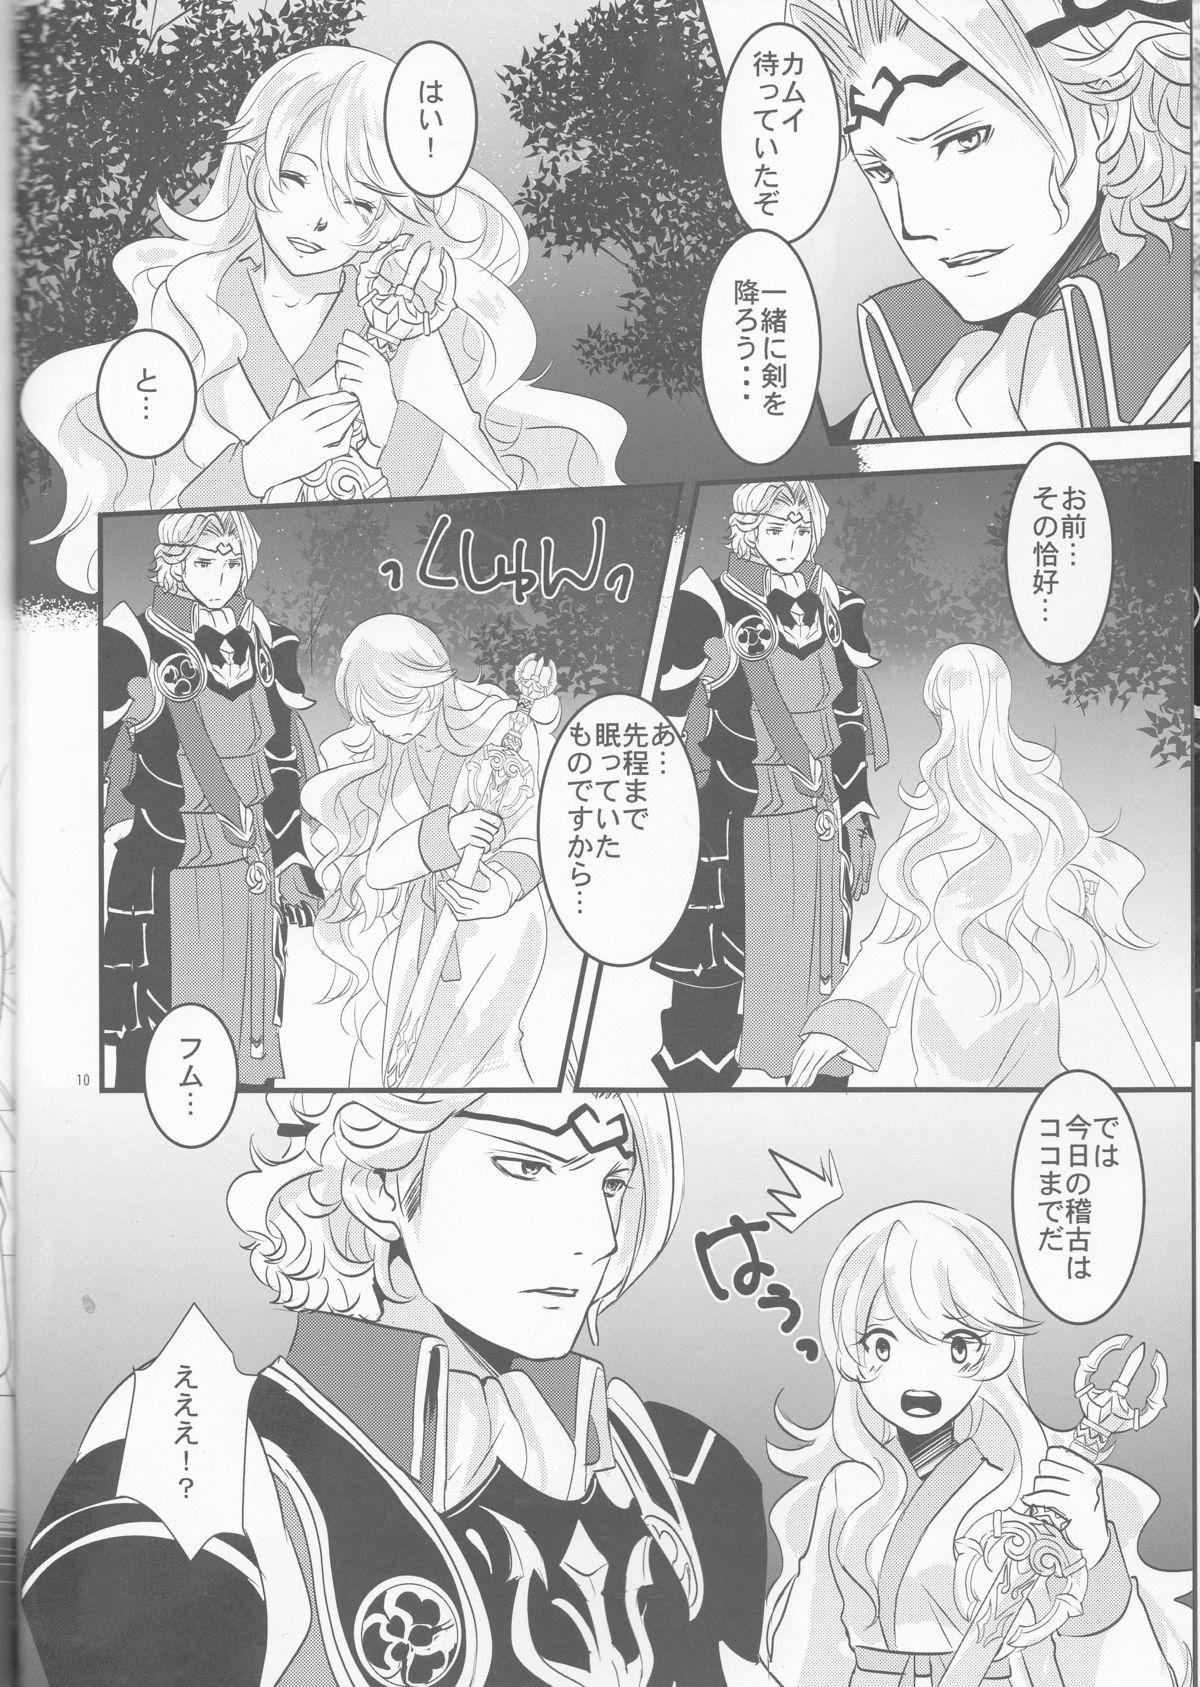 Sextoys Close to the limit - Fire emblem if Scene - Page 9